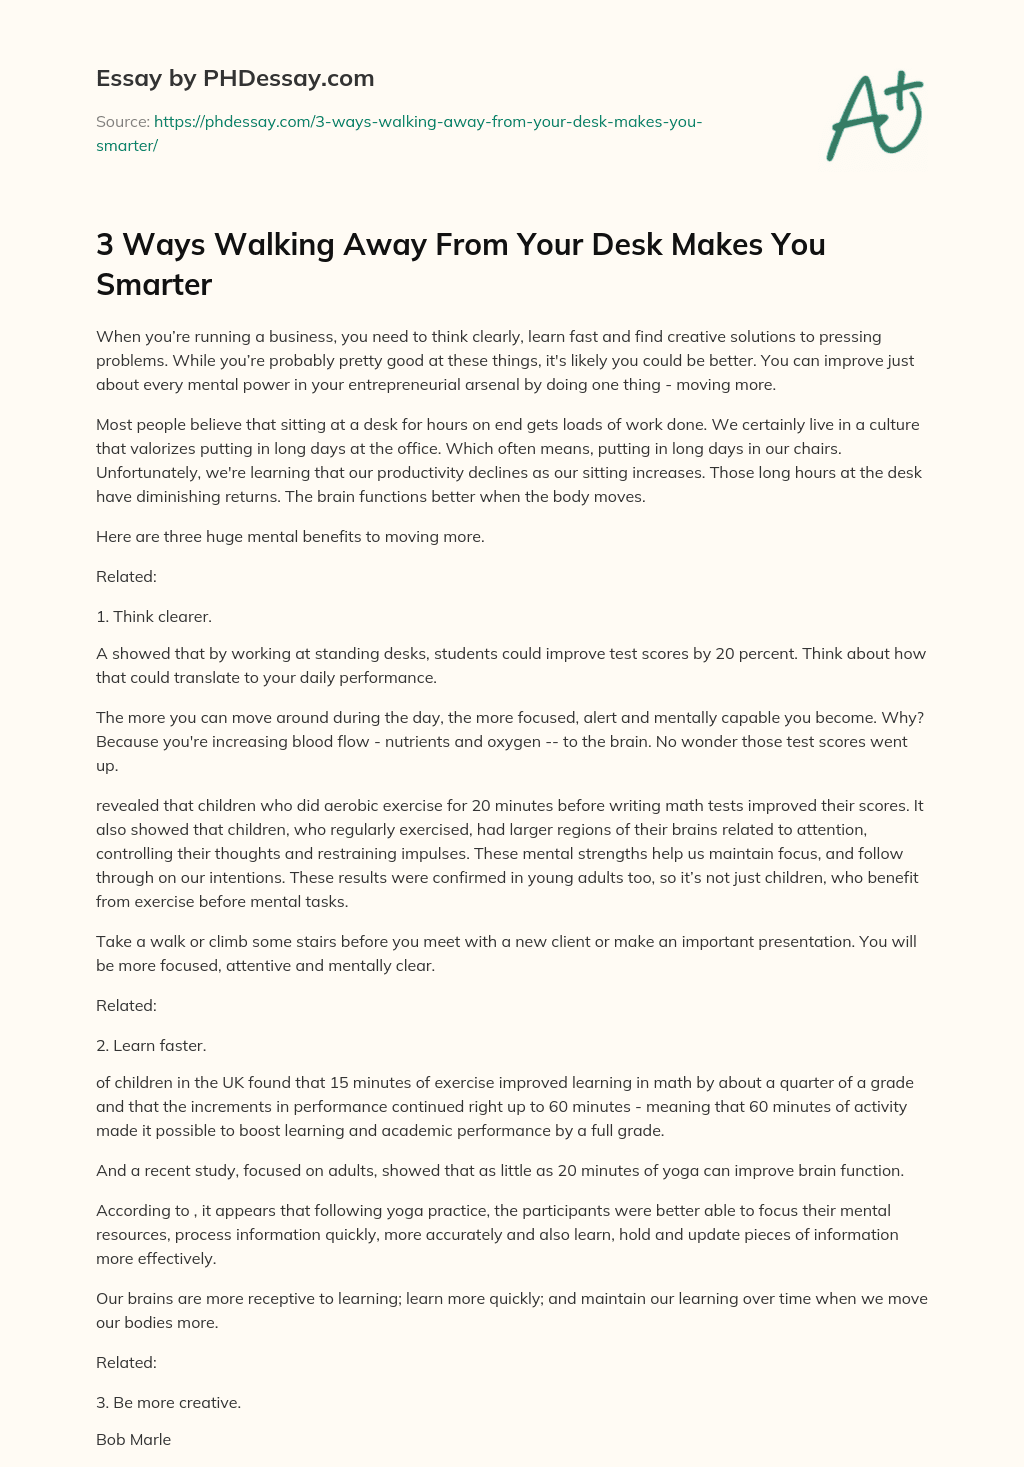 3 Ways Walking Away From Your Desk Makes You Smarter essay